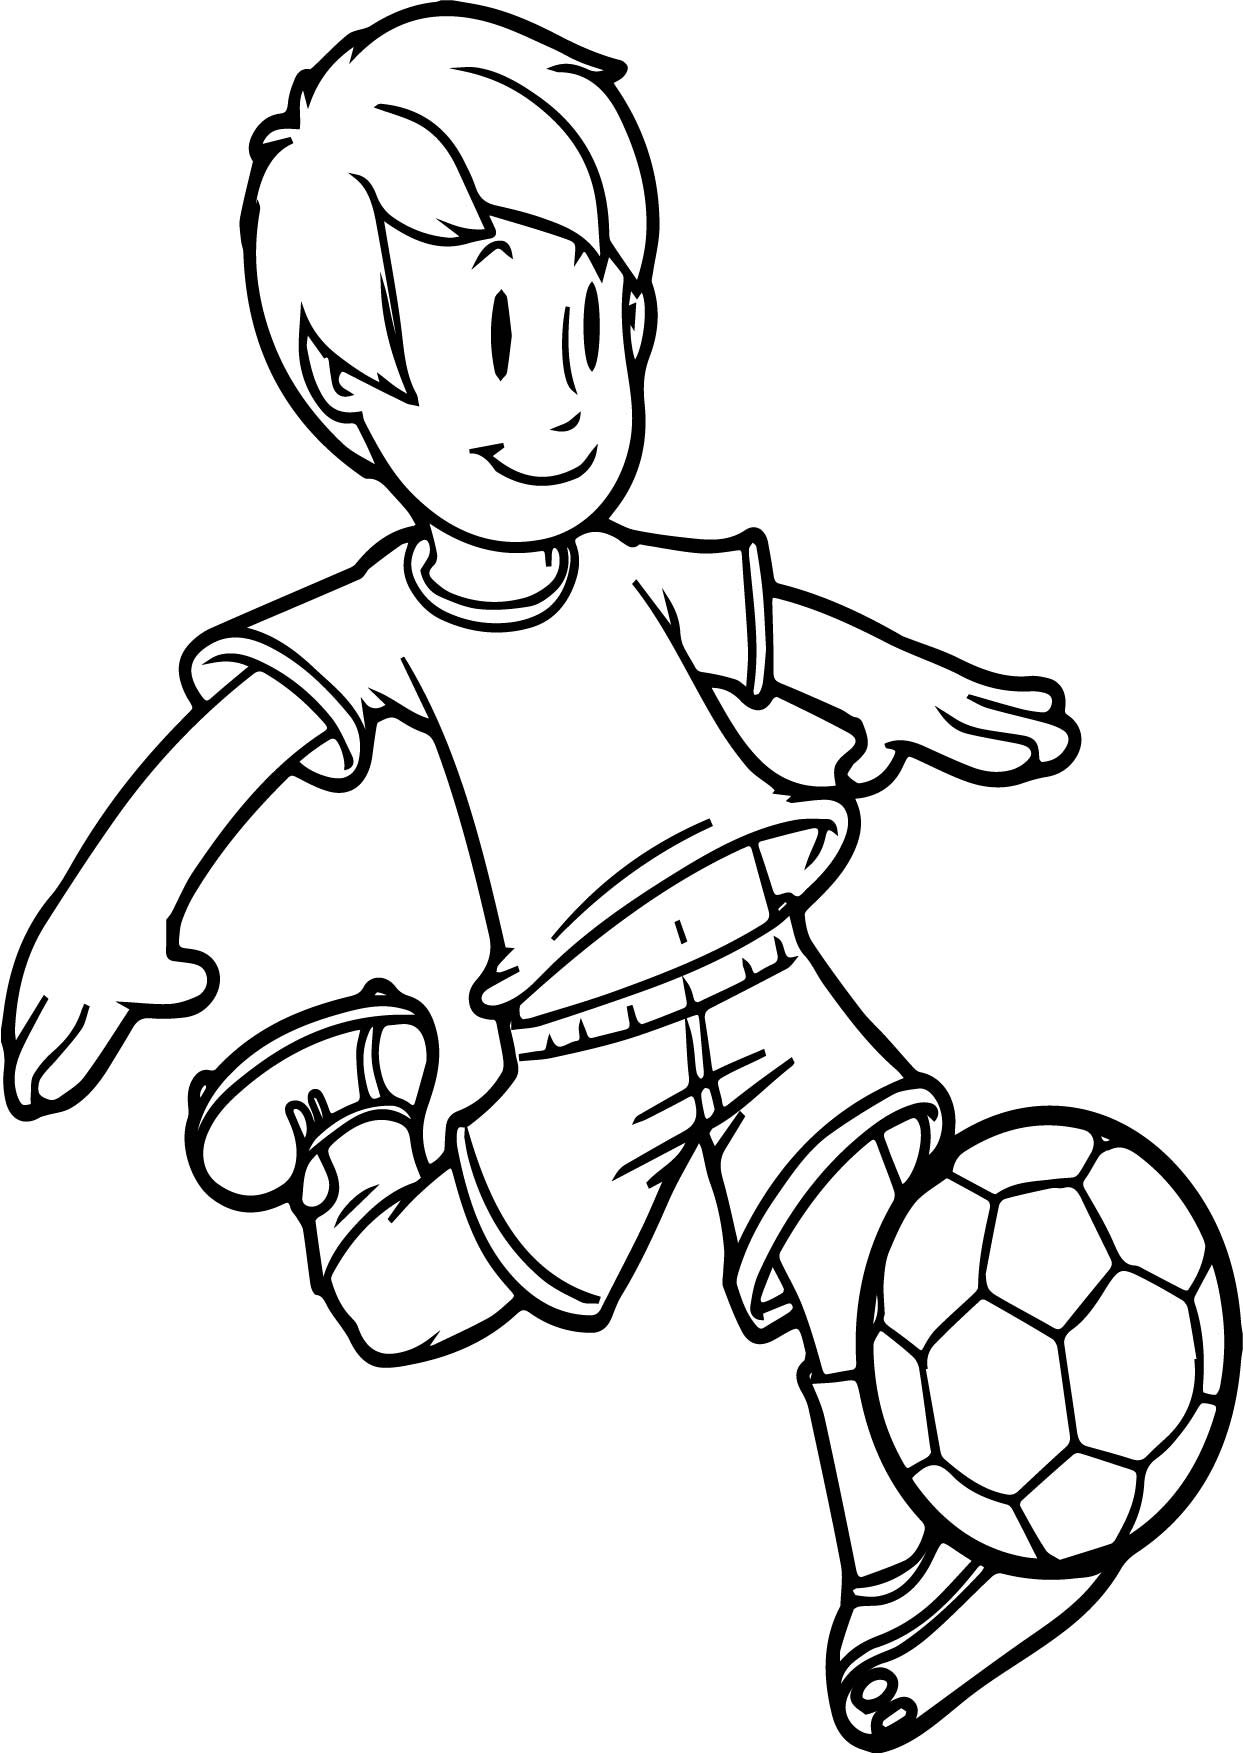 Cartoon Boy Coloring Pages at GetColorings.com | Free printable